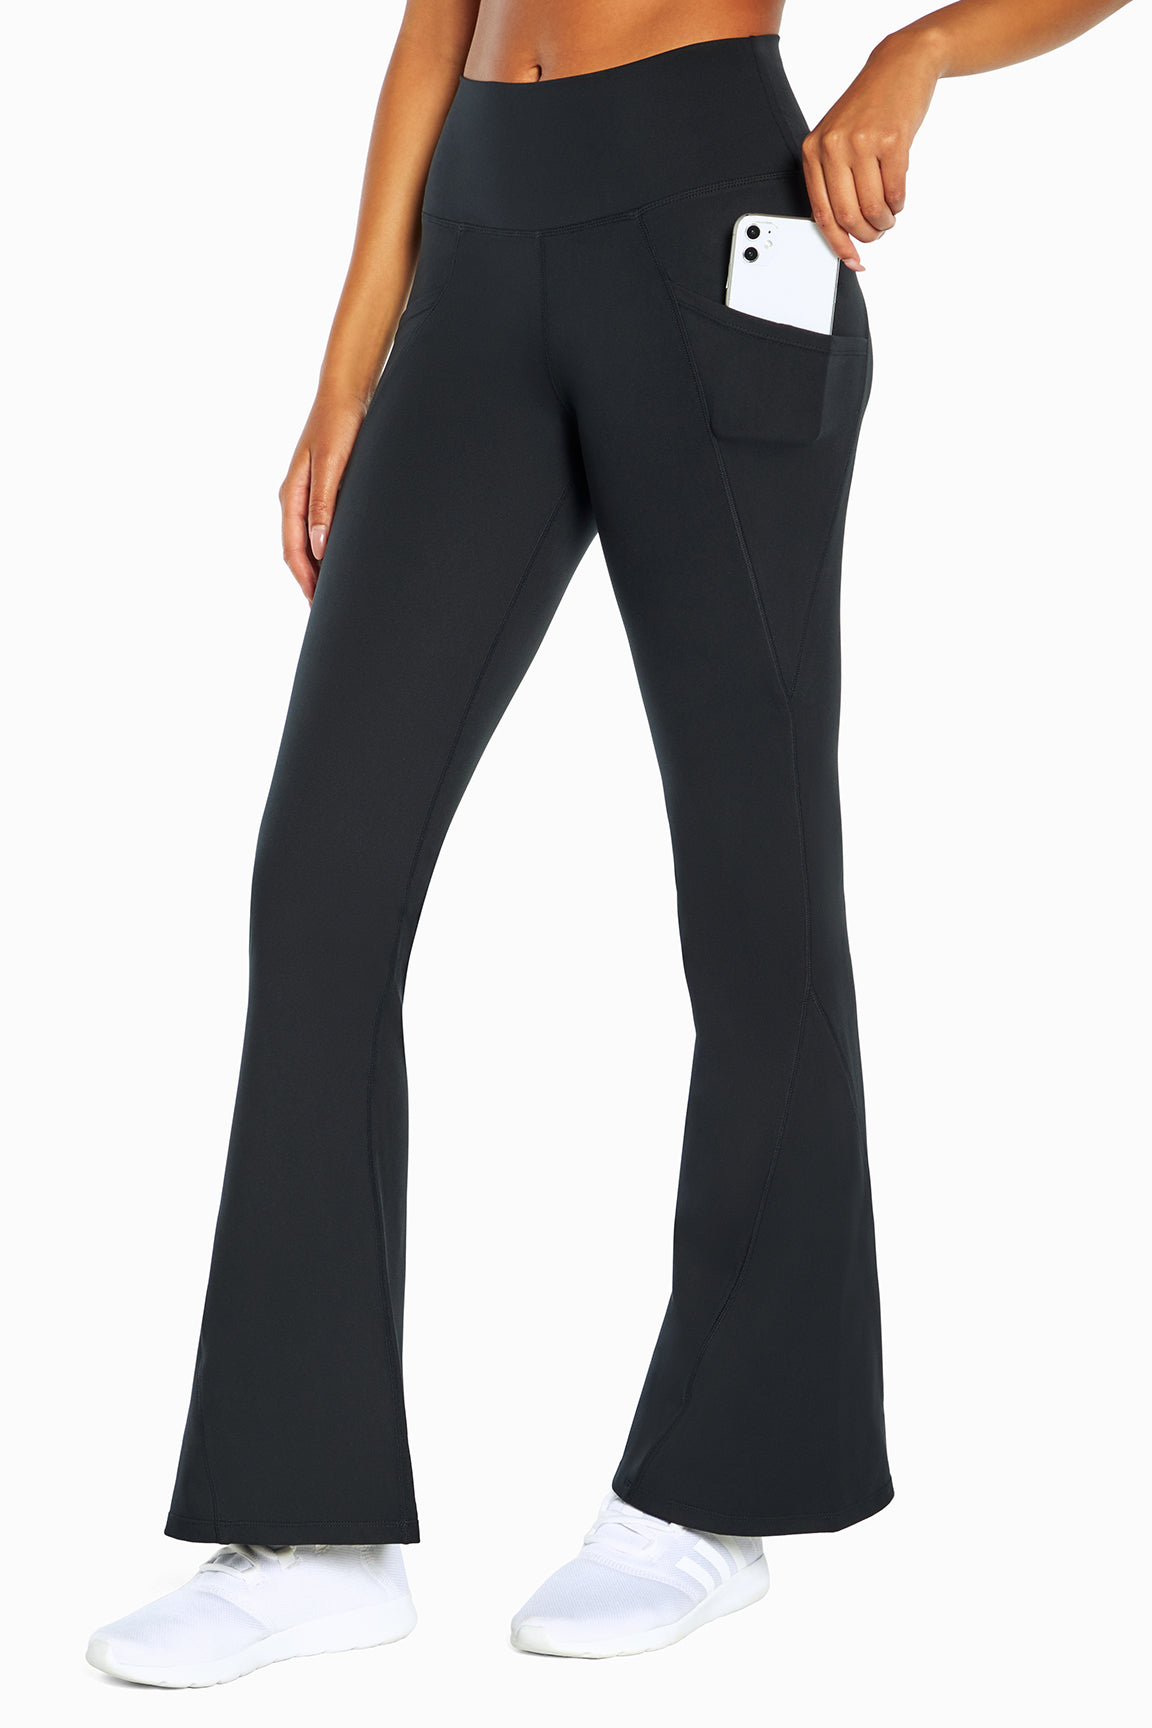 Balance Collection Black Womens Size Small Leggings